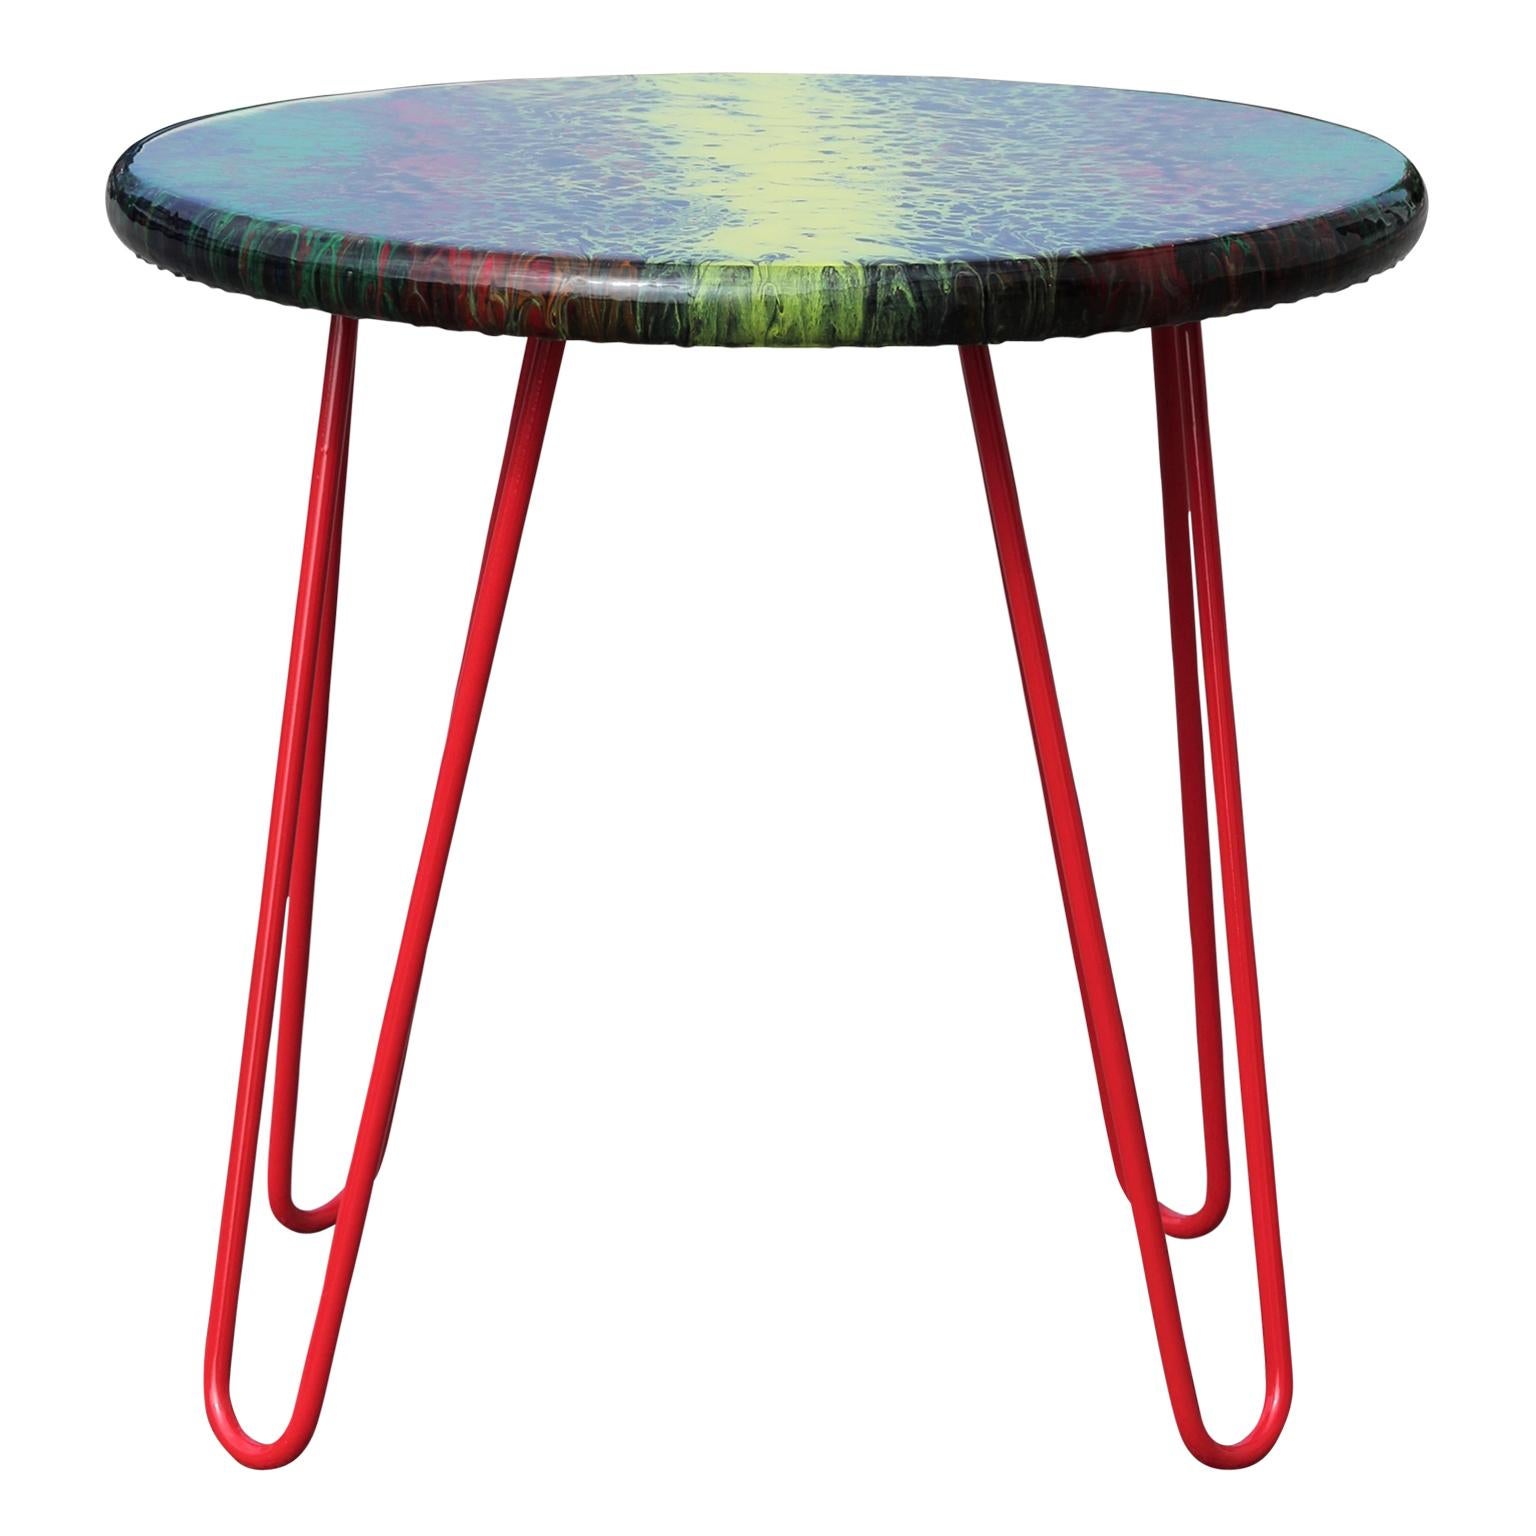 Colorful abstract acrylic fluid painted side table that incorporates hues of black, yellow, green, and red. Signed and dated by the artist (Stephen Alaniz) on the underside of the table.

Artist biography: 